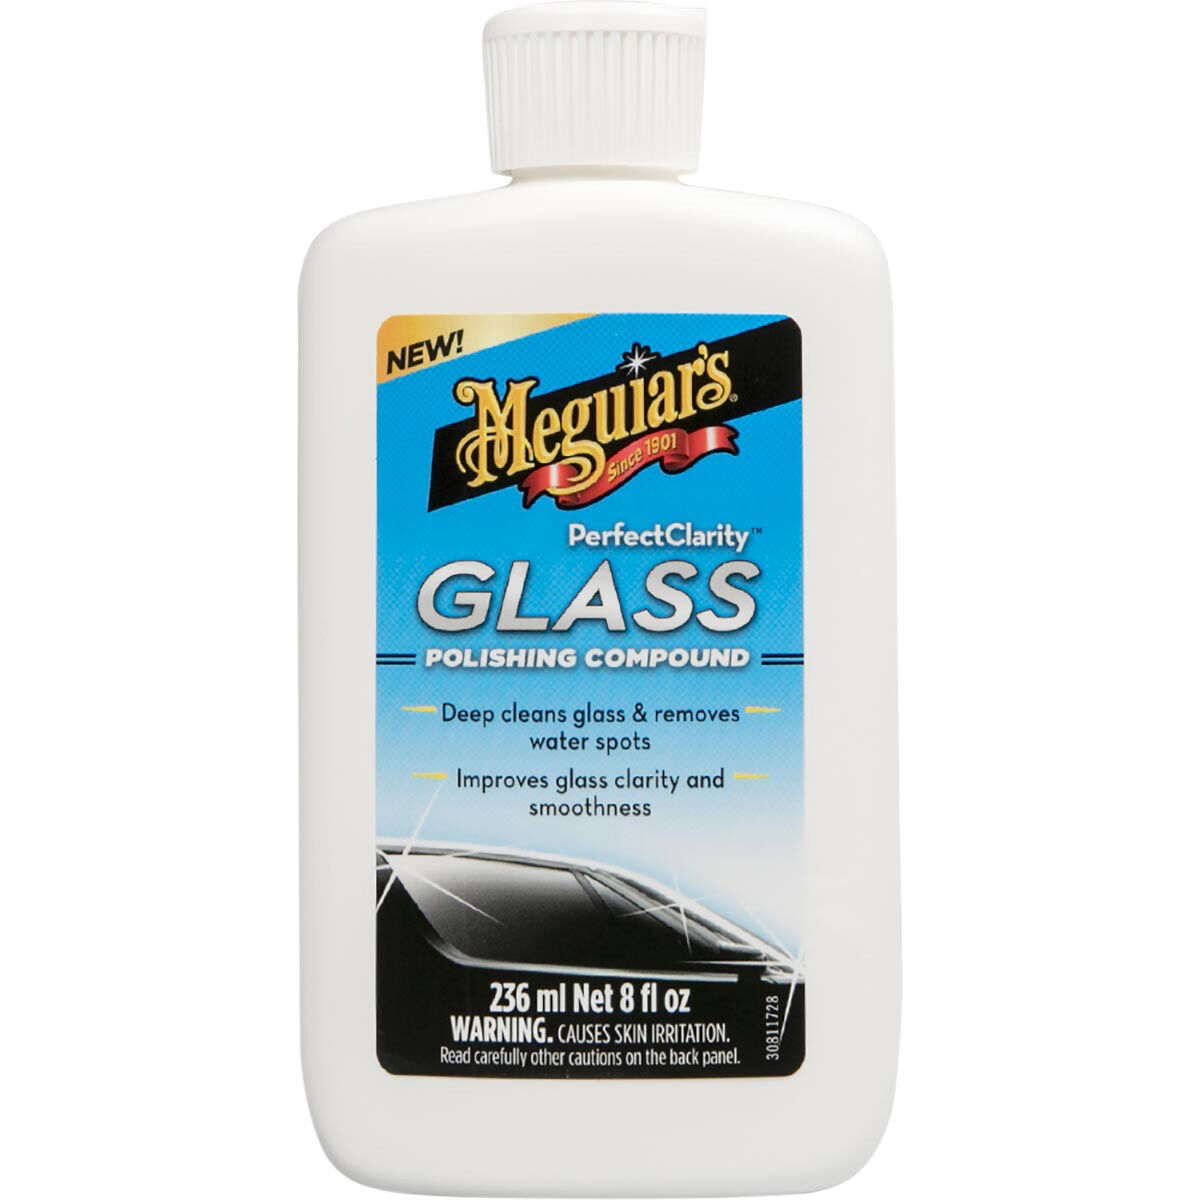 Meguiars Perfect Clarity Glass Kit 2 Piece Water Repellant Kit